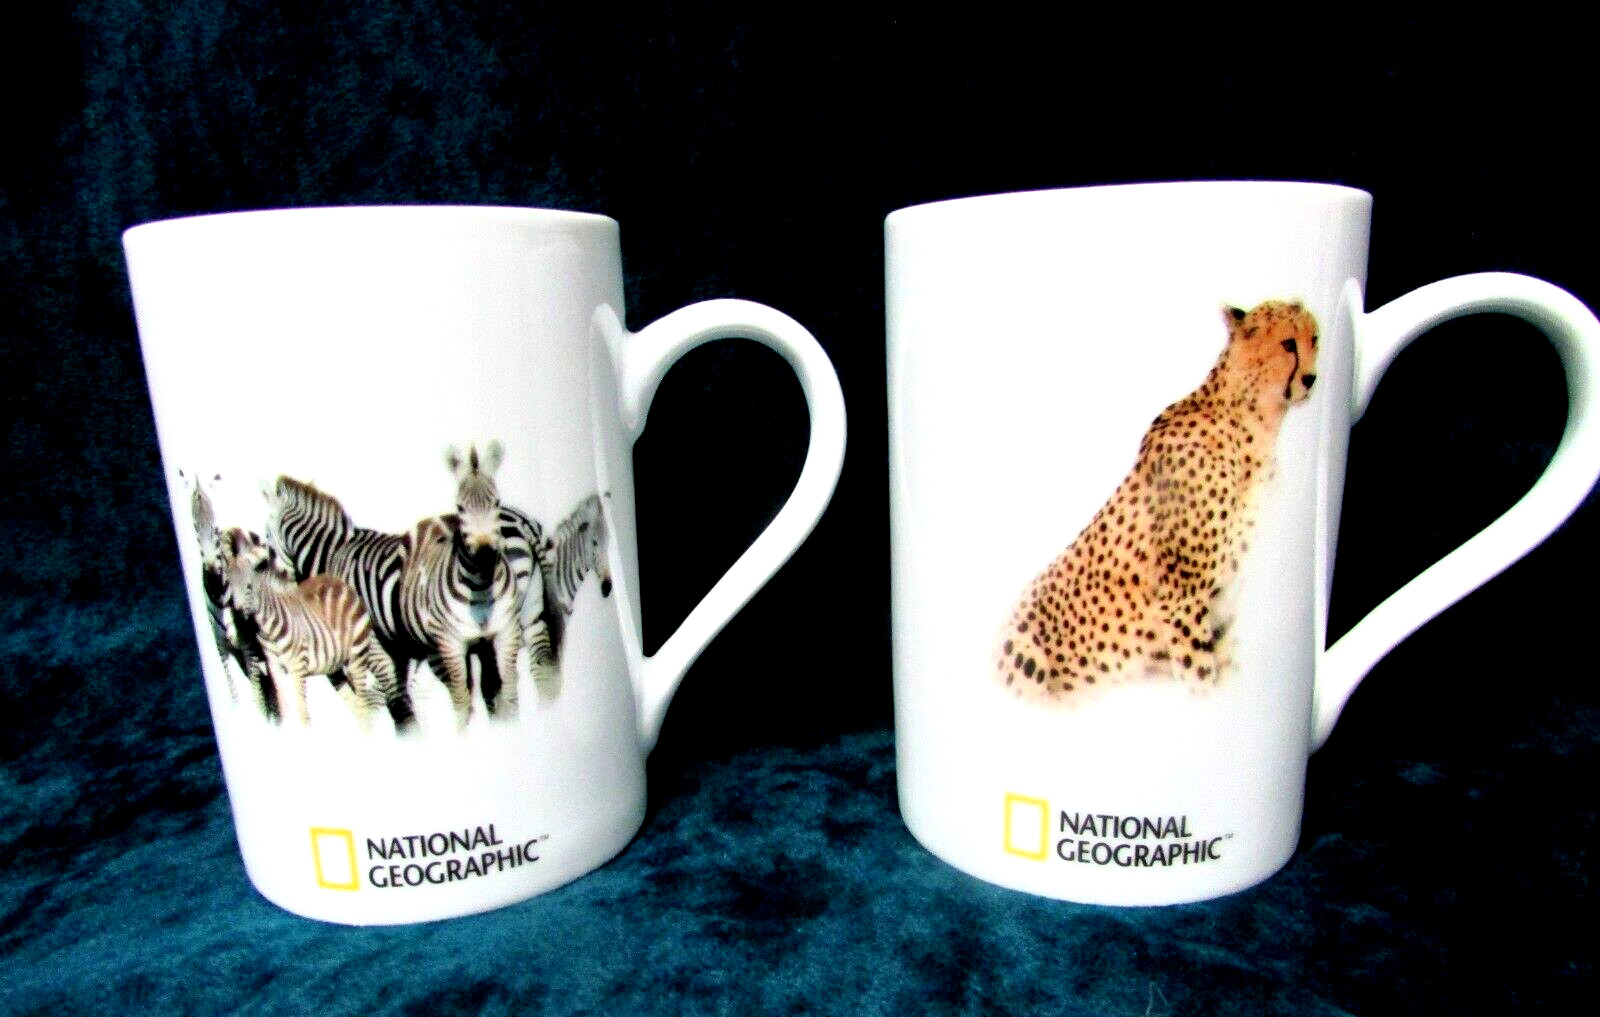 National Geographic 2004 Home Collection Mugs Set of 2 Zebras & Cheetah Thailand